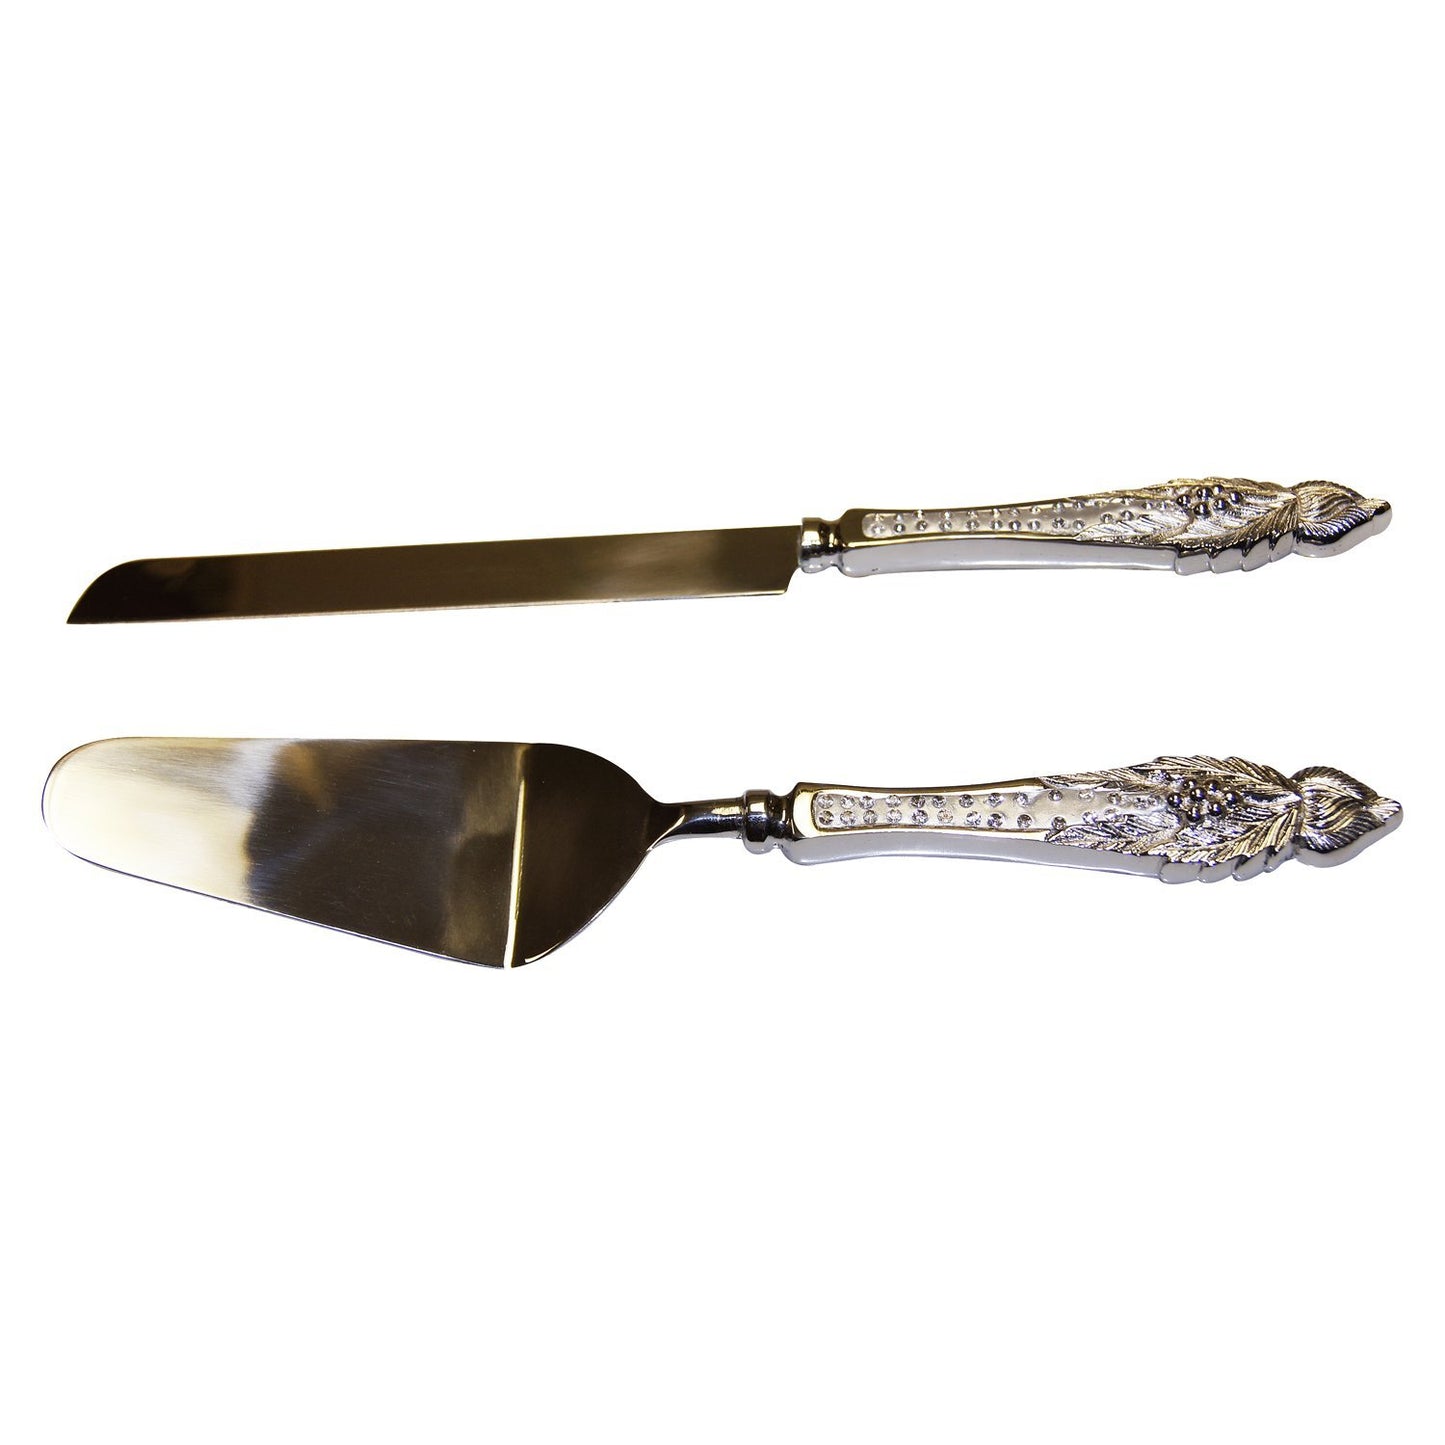 GiftBay Wedding Cake Knife & Server Set of 2 Pieces in Wooden Velvet Box., 12" L, Silver, Handles with Crystals